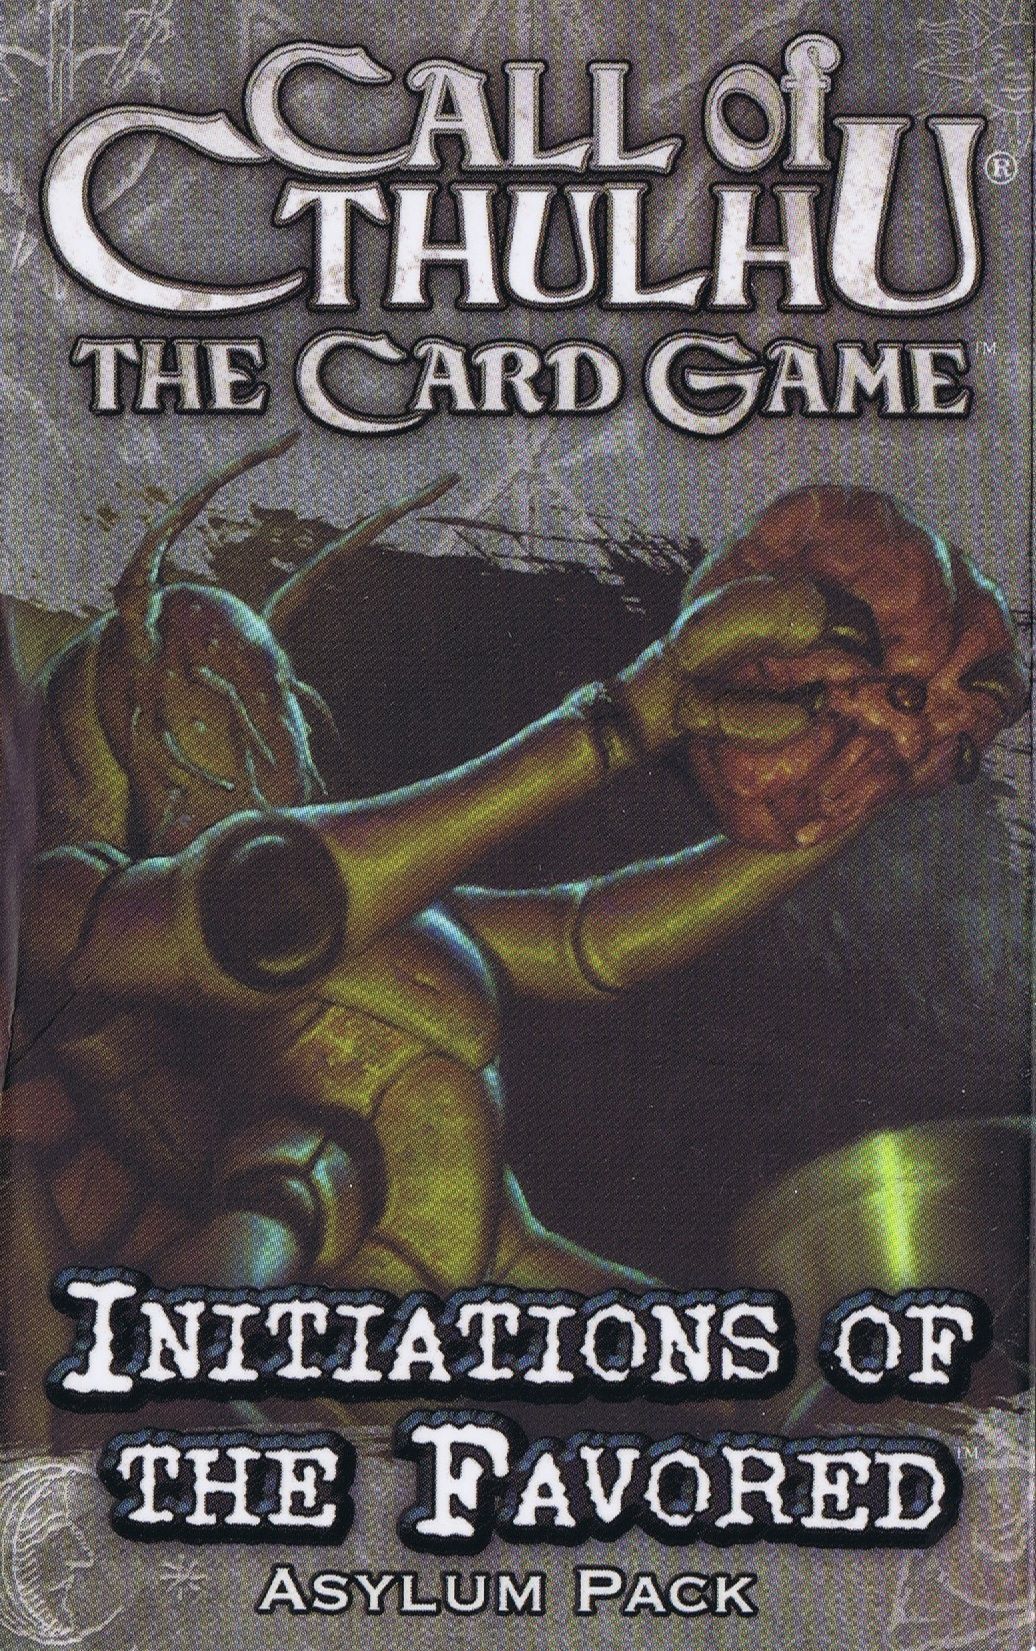 Call of Cthulhu: The Card Game – Initiations of the Favored Asylum Pack